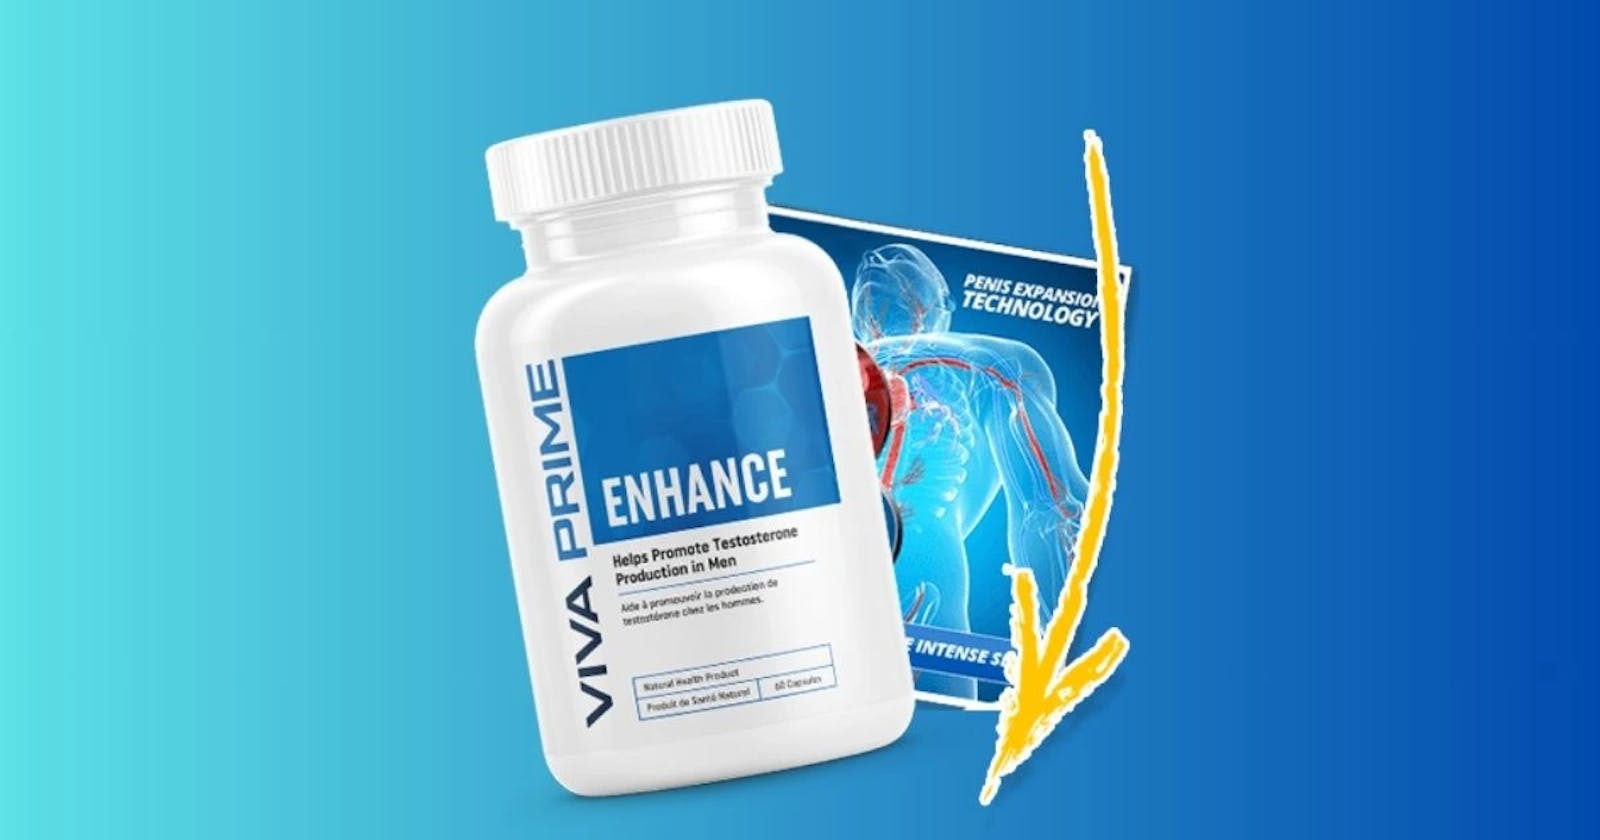 Viva Prime Male Enhancement Best Reviews, Results, Where To Buy? (CA)